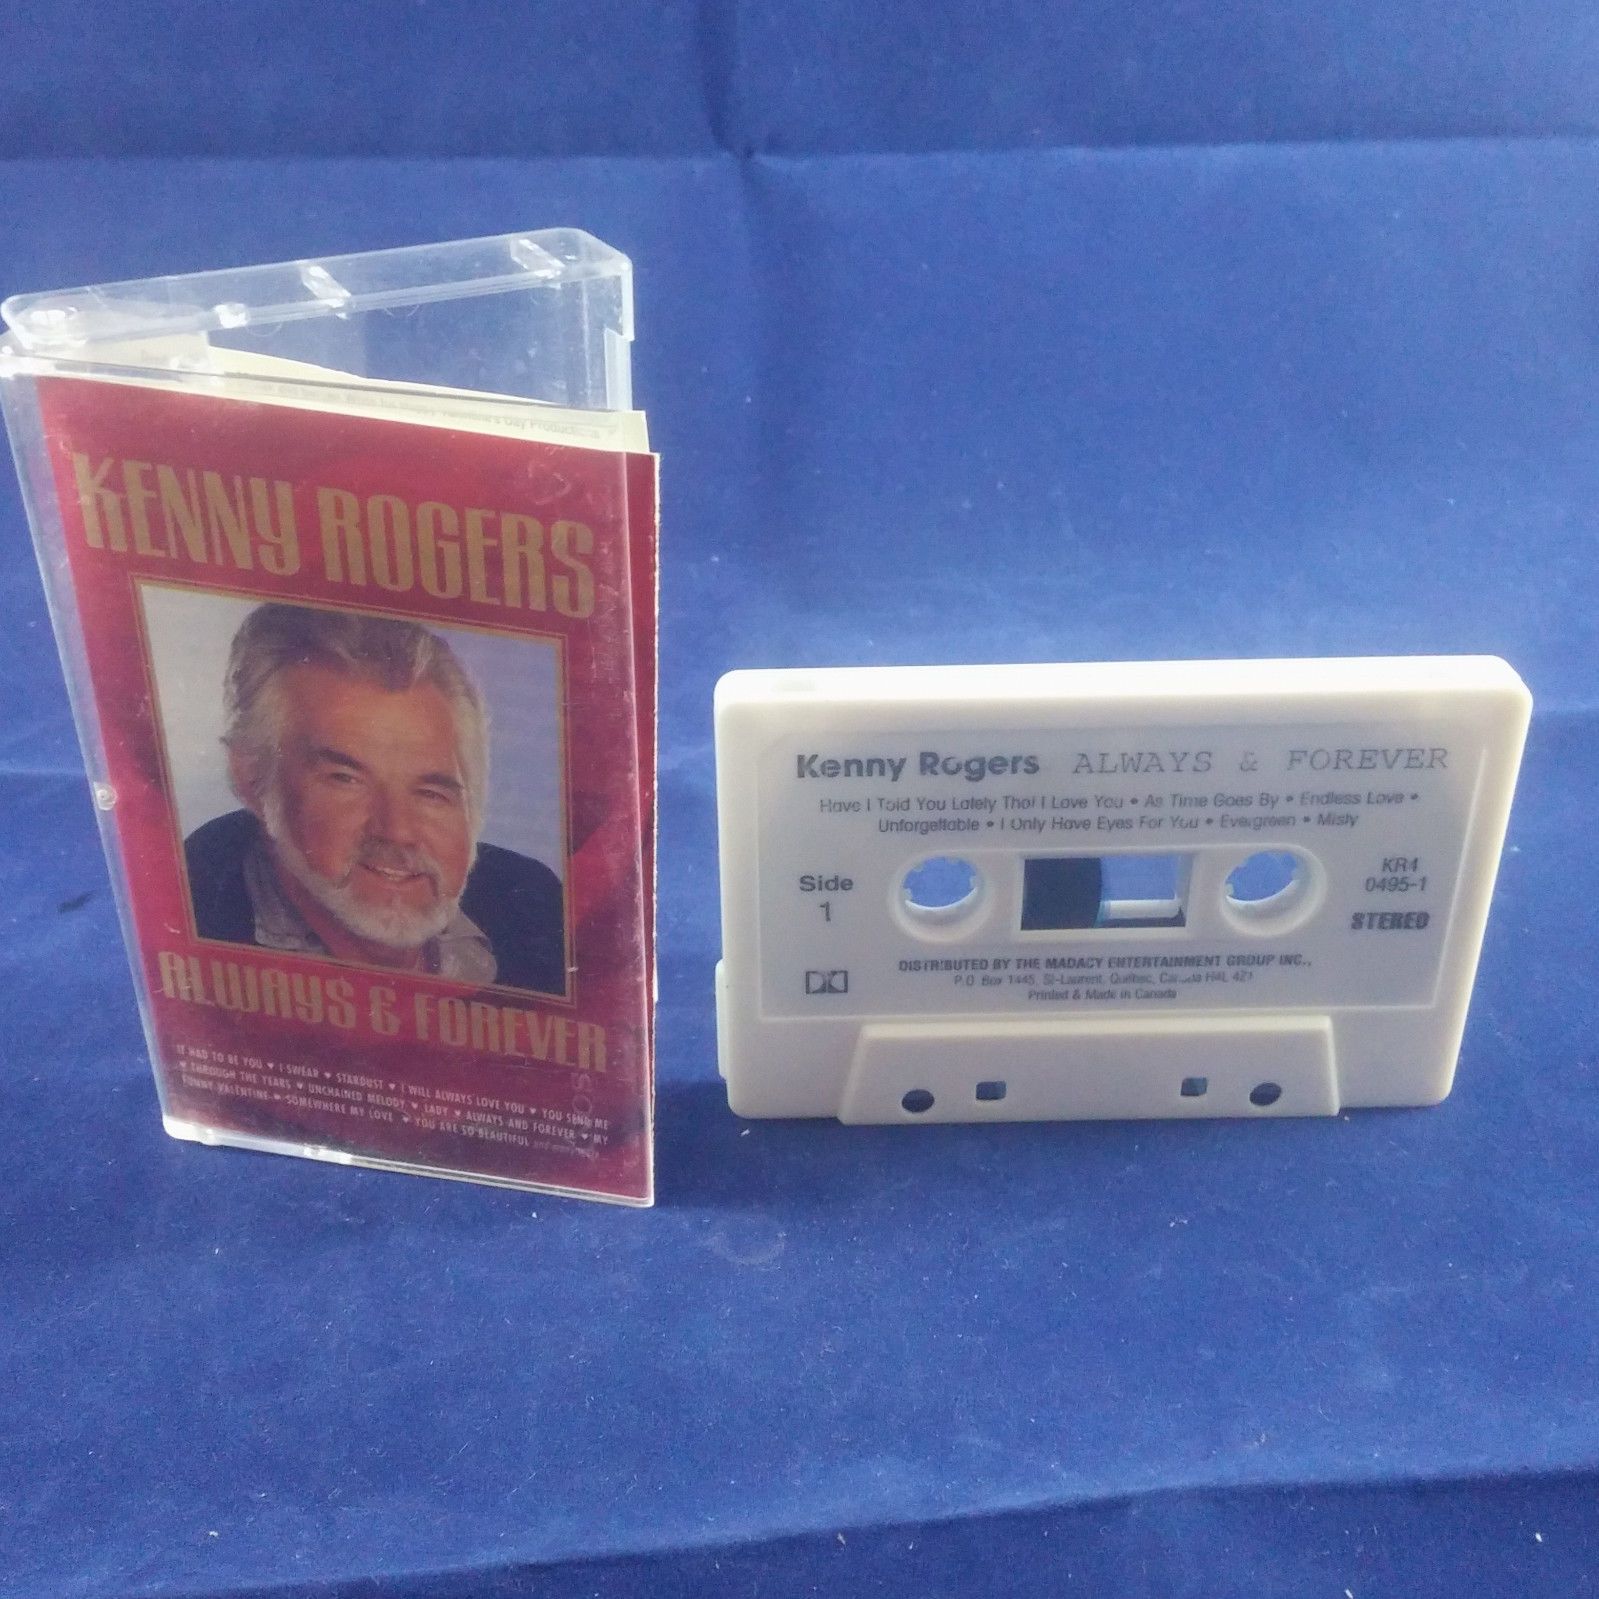 kenny rogers through the years mp3